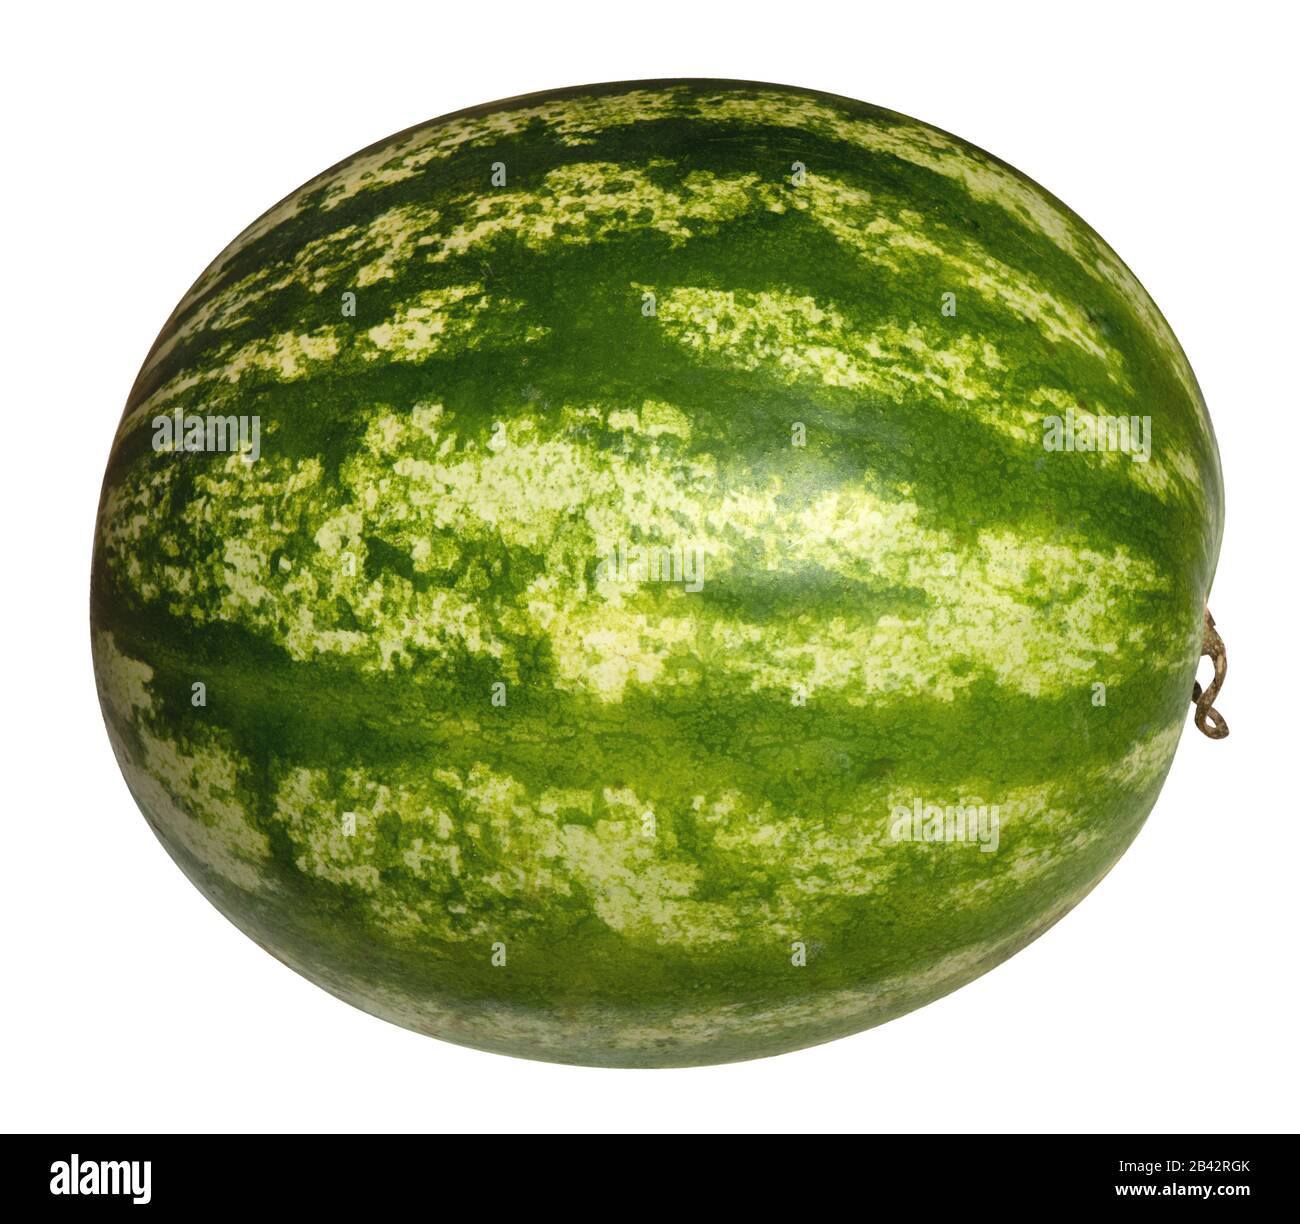 A whole mottled, green and white watermelon (Citrullus lanatus) isolated on a white background Stock Photo